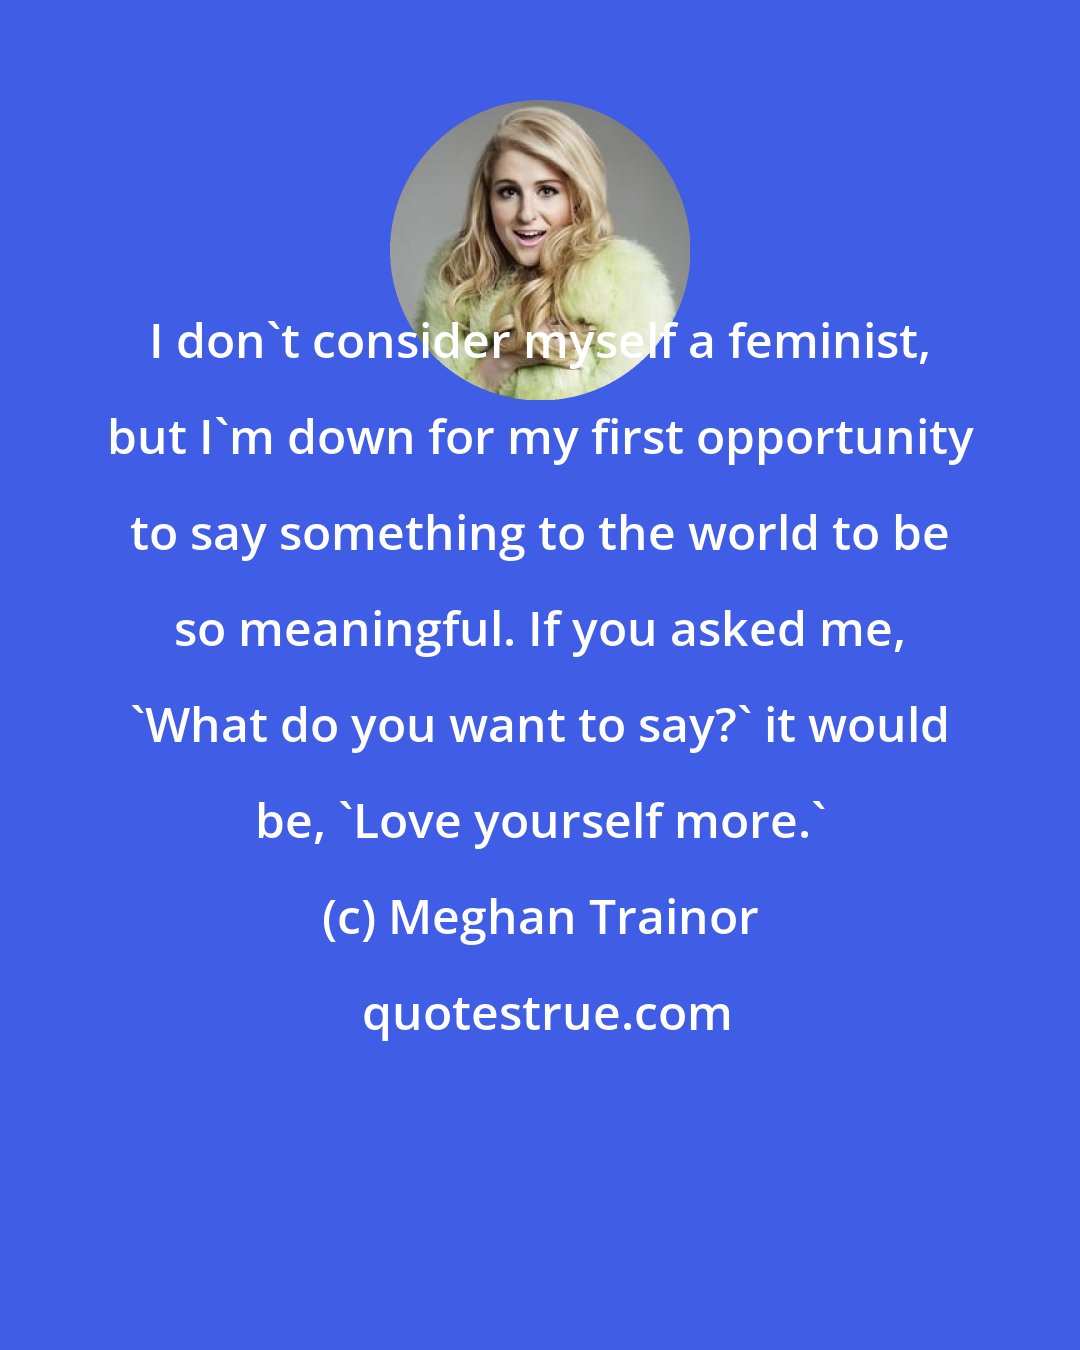 Meghan Trainor: I don't consider myself a feminist, but I'm down for my first opportunity to say something to the world to be so meaningful. If you asked me, 'What do you want to say?' it would be, 'Love yourself more.'